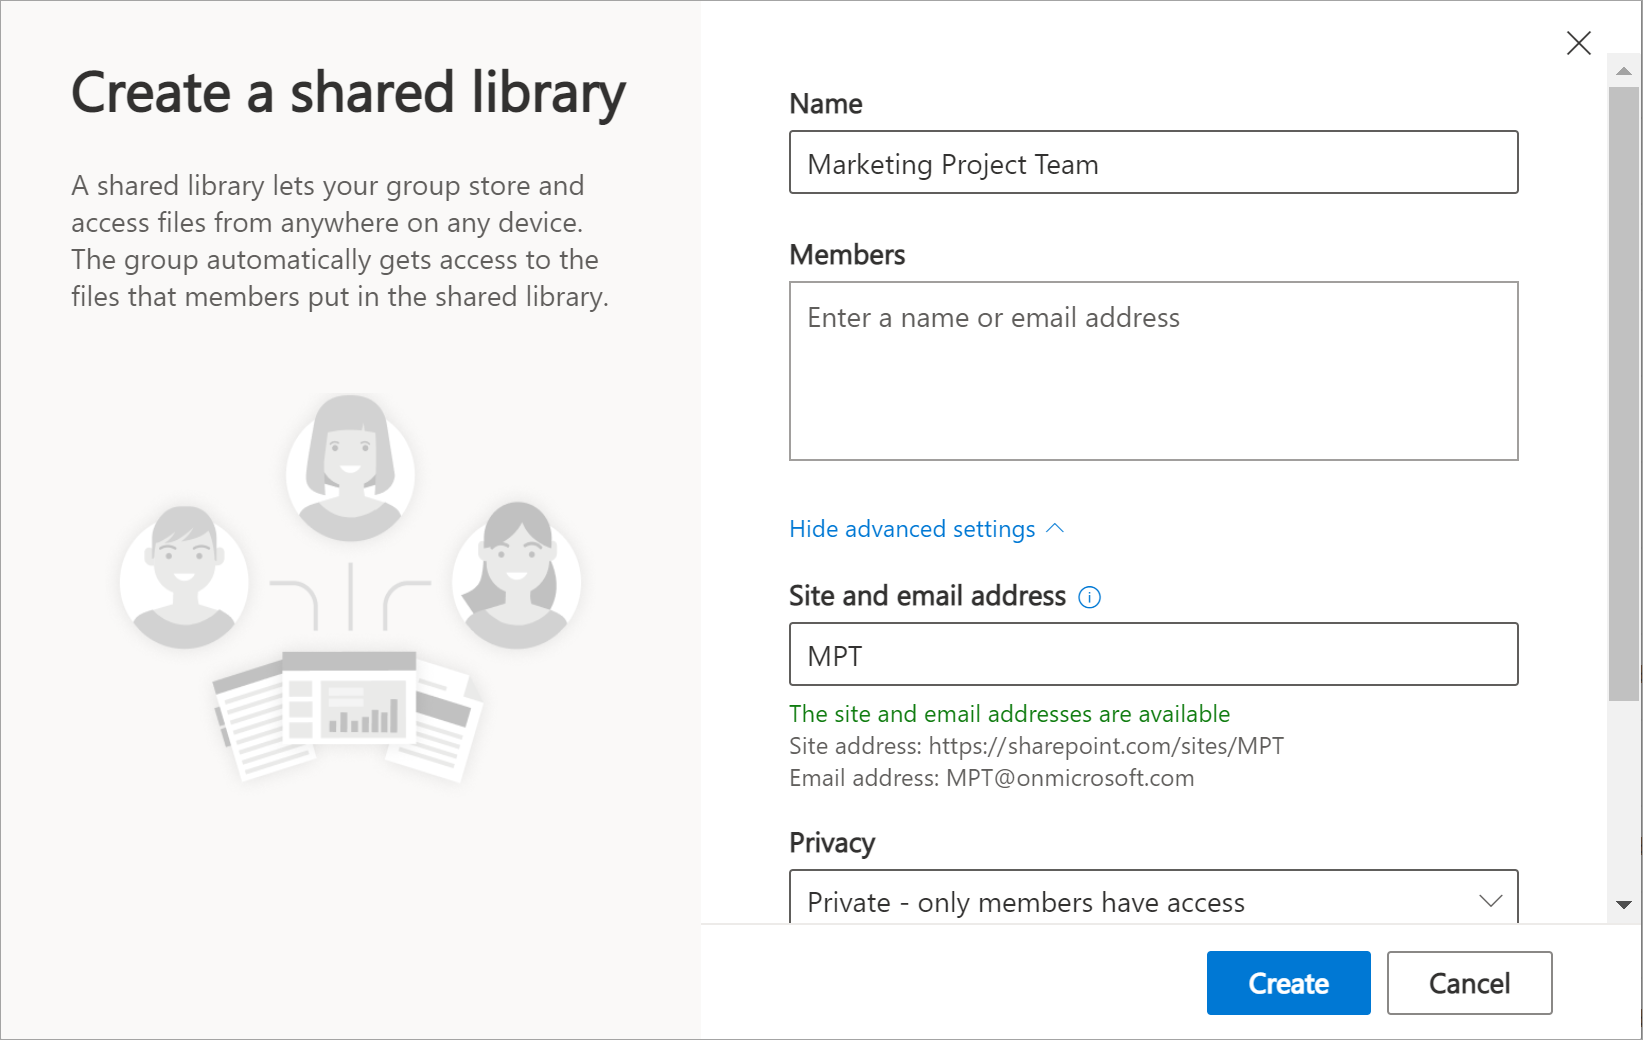 Shows  the "Create a shared library" page, with options to scroll through on the right.